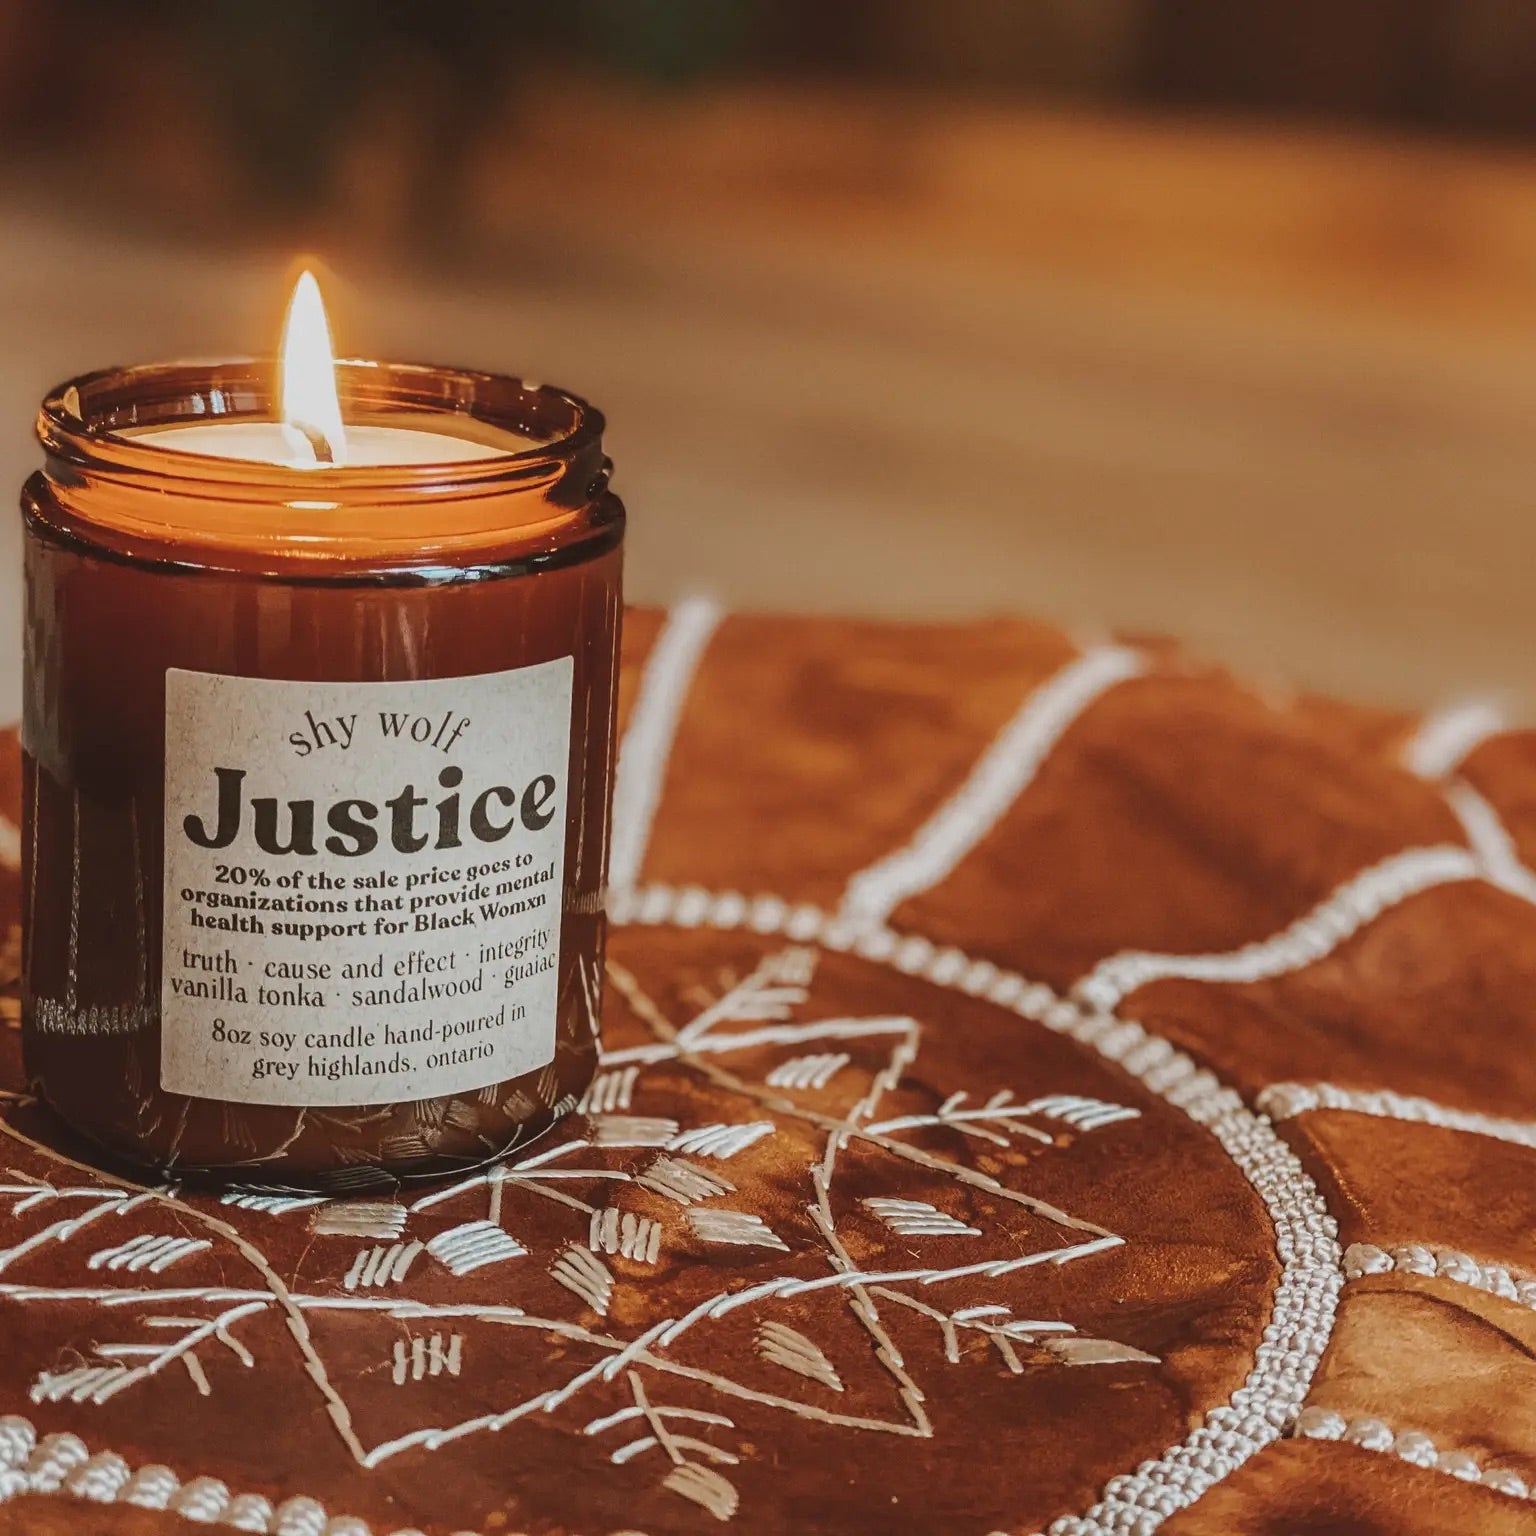 Justice Soy Candle for Charity - Vanilla, Sandalwood